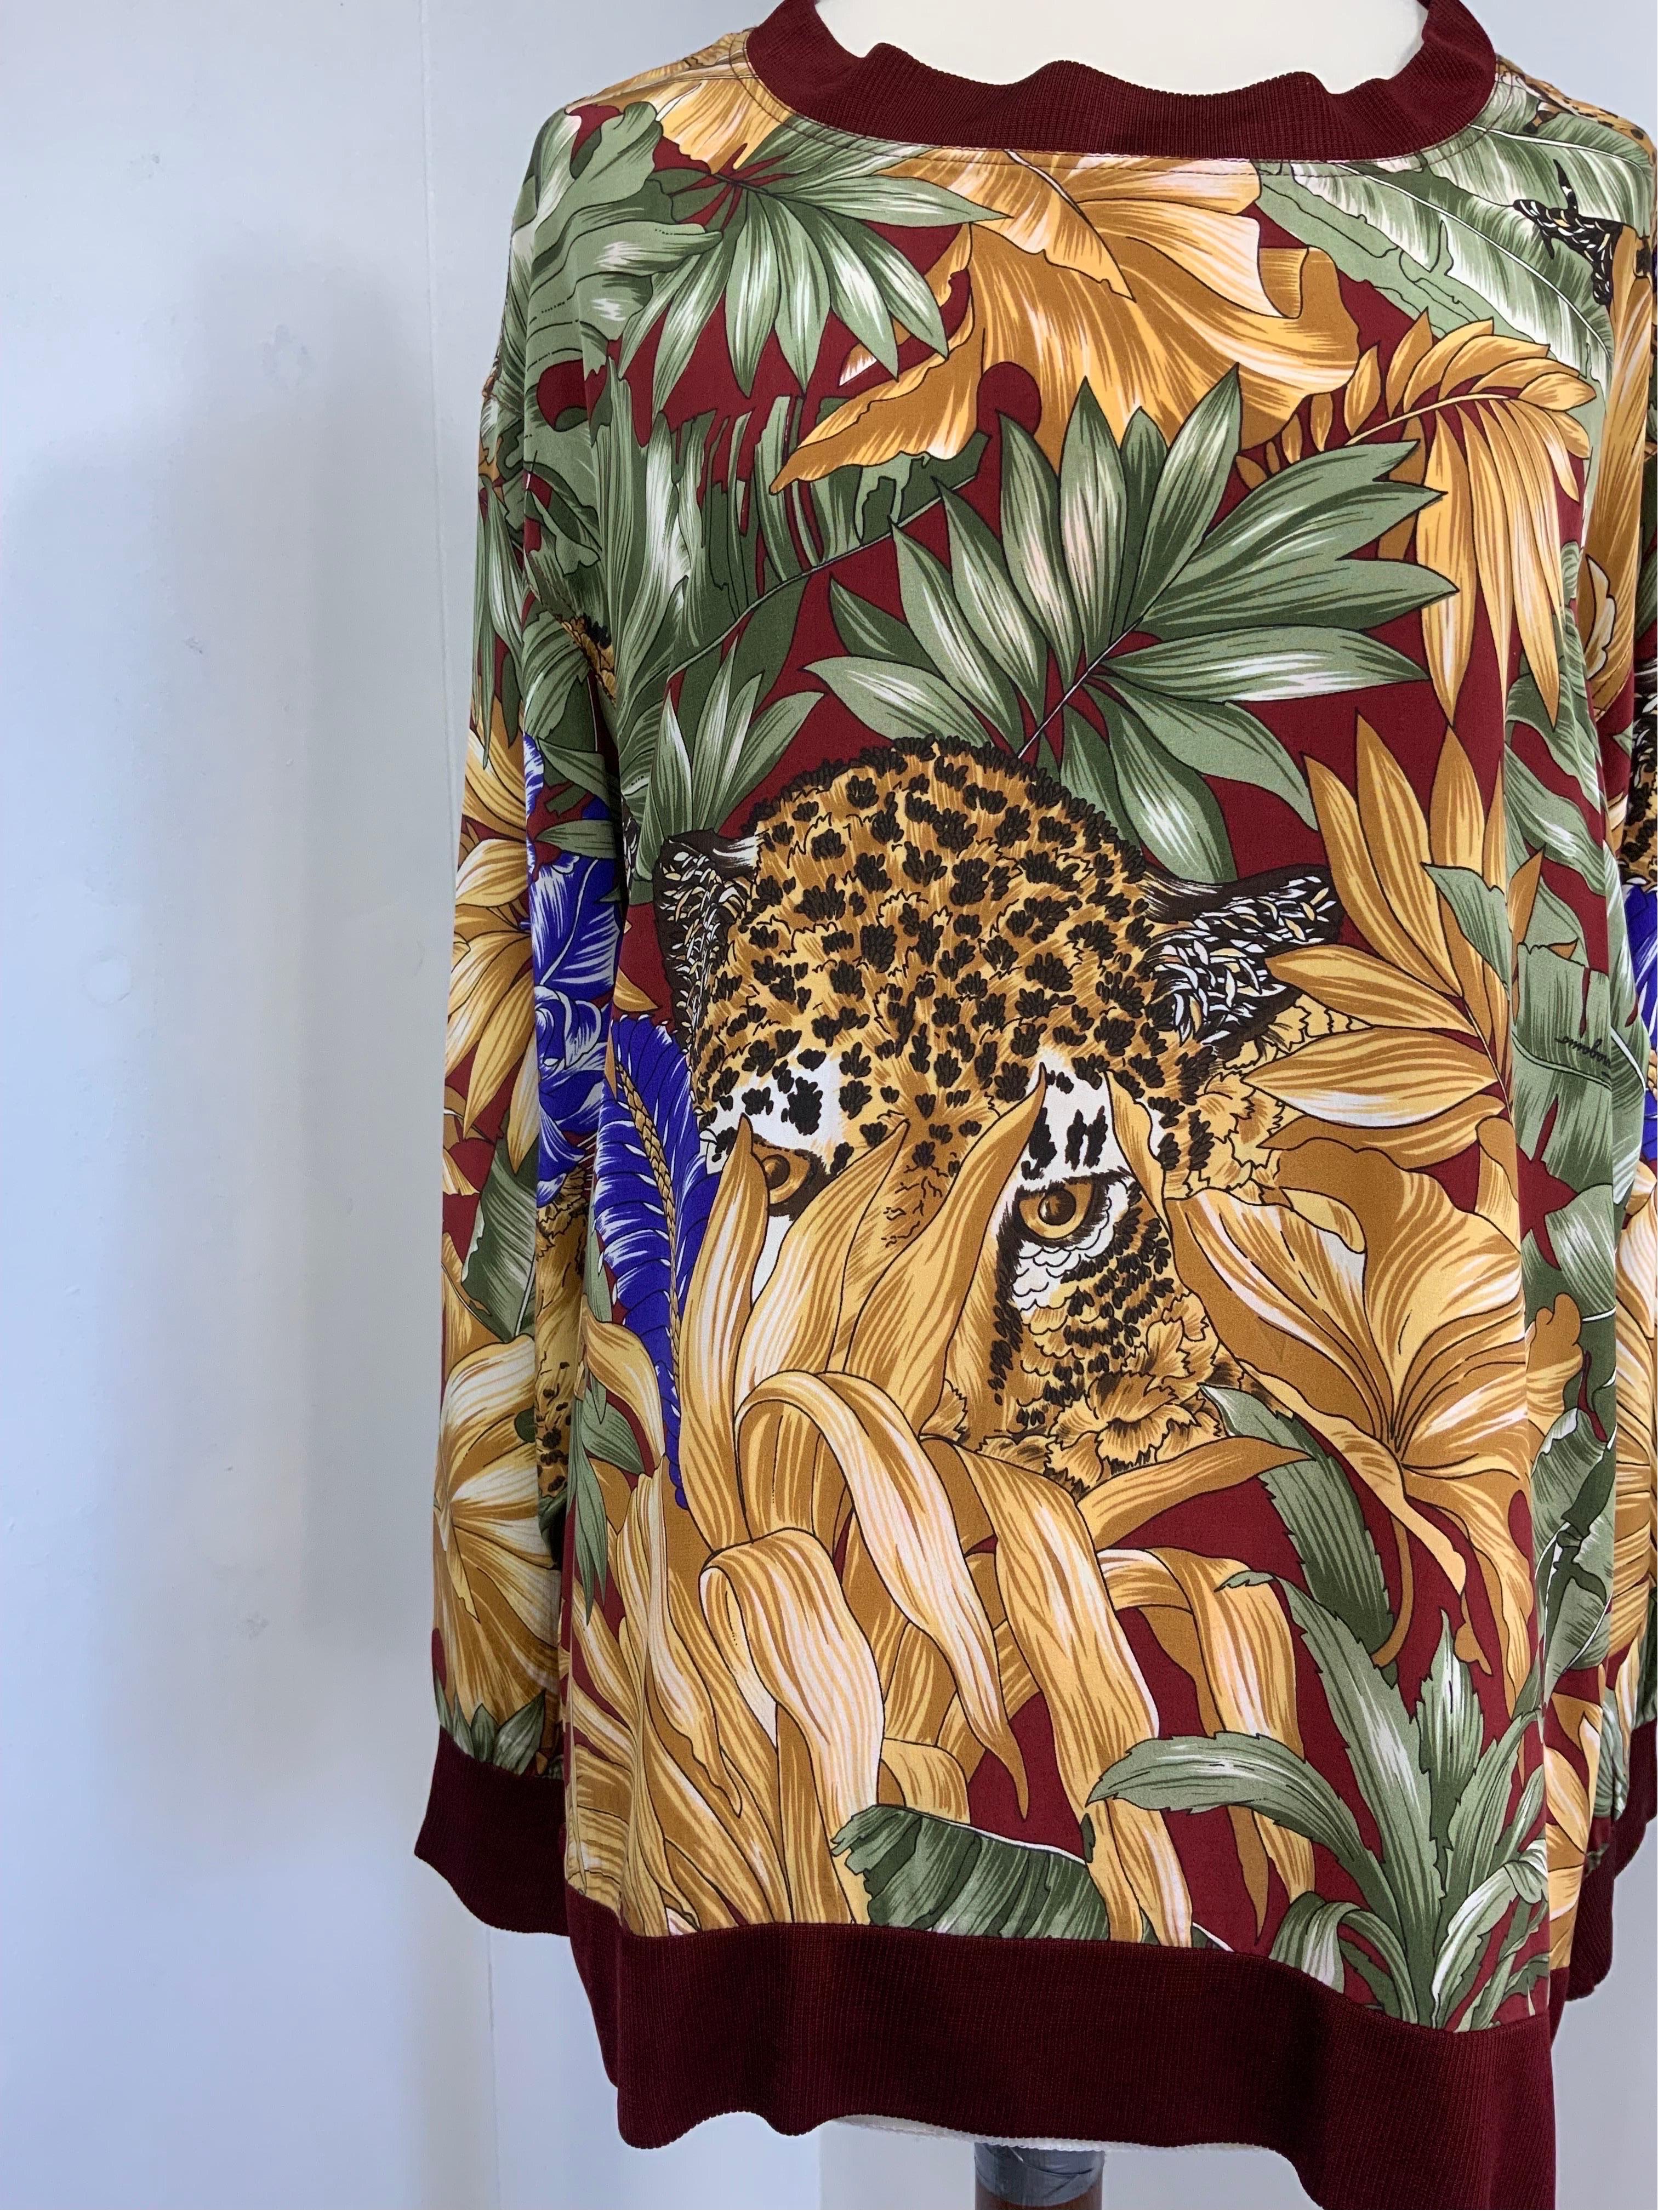 JUNGLE SALVATORE FERRAGAMO BLOUSE
Missing composition and size label.
Crafted in silk with a tropical pattern.
Fits multiple sizes
Shoulders (low) 52 cm
Bust 56 cm
Length 71 cm
Sleeve 56 cm
Excellent general condition, it shows signs of normal use.